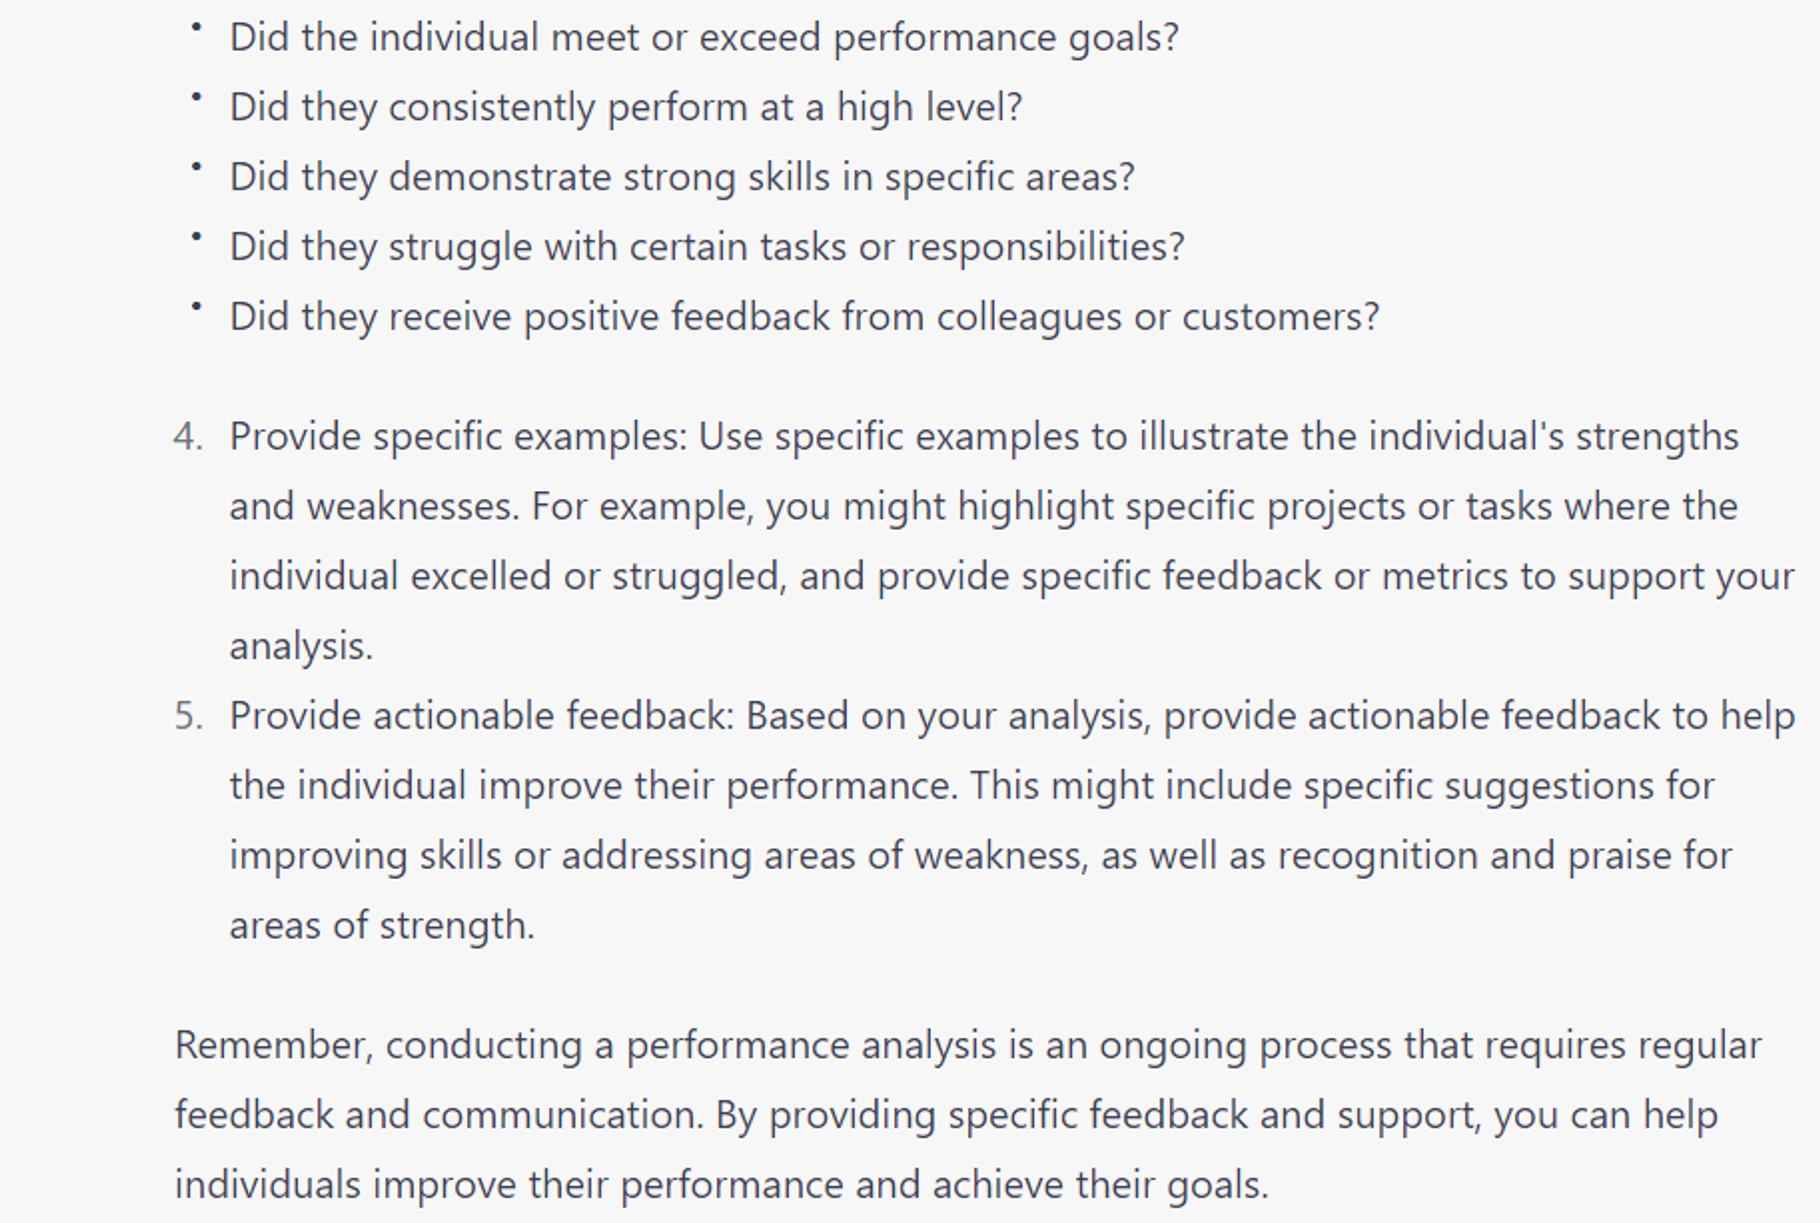  7 Proven ChatGPT Prompts: Provide team with feedback on individual performance